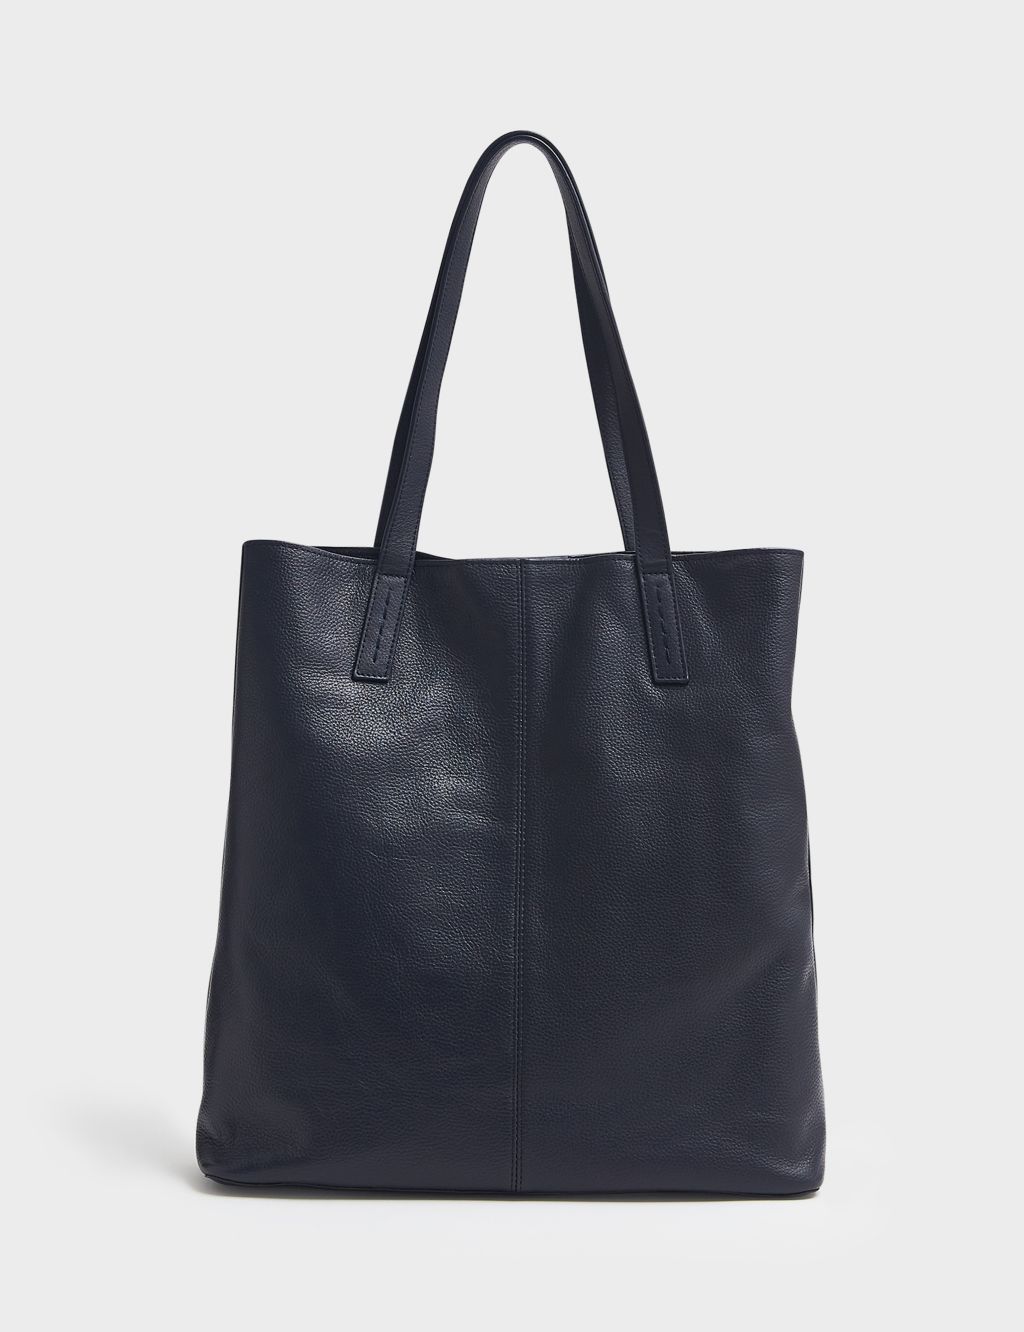 Leather Tote Bag image 3